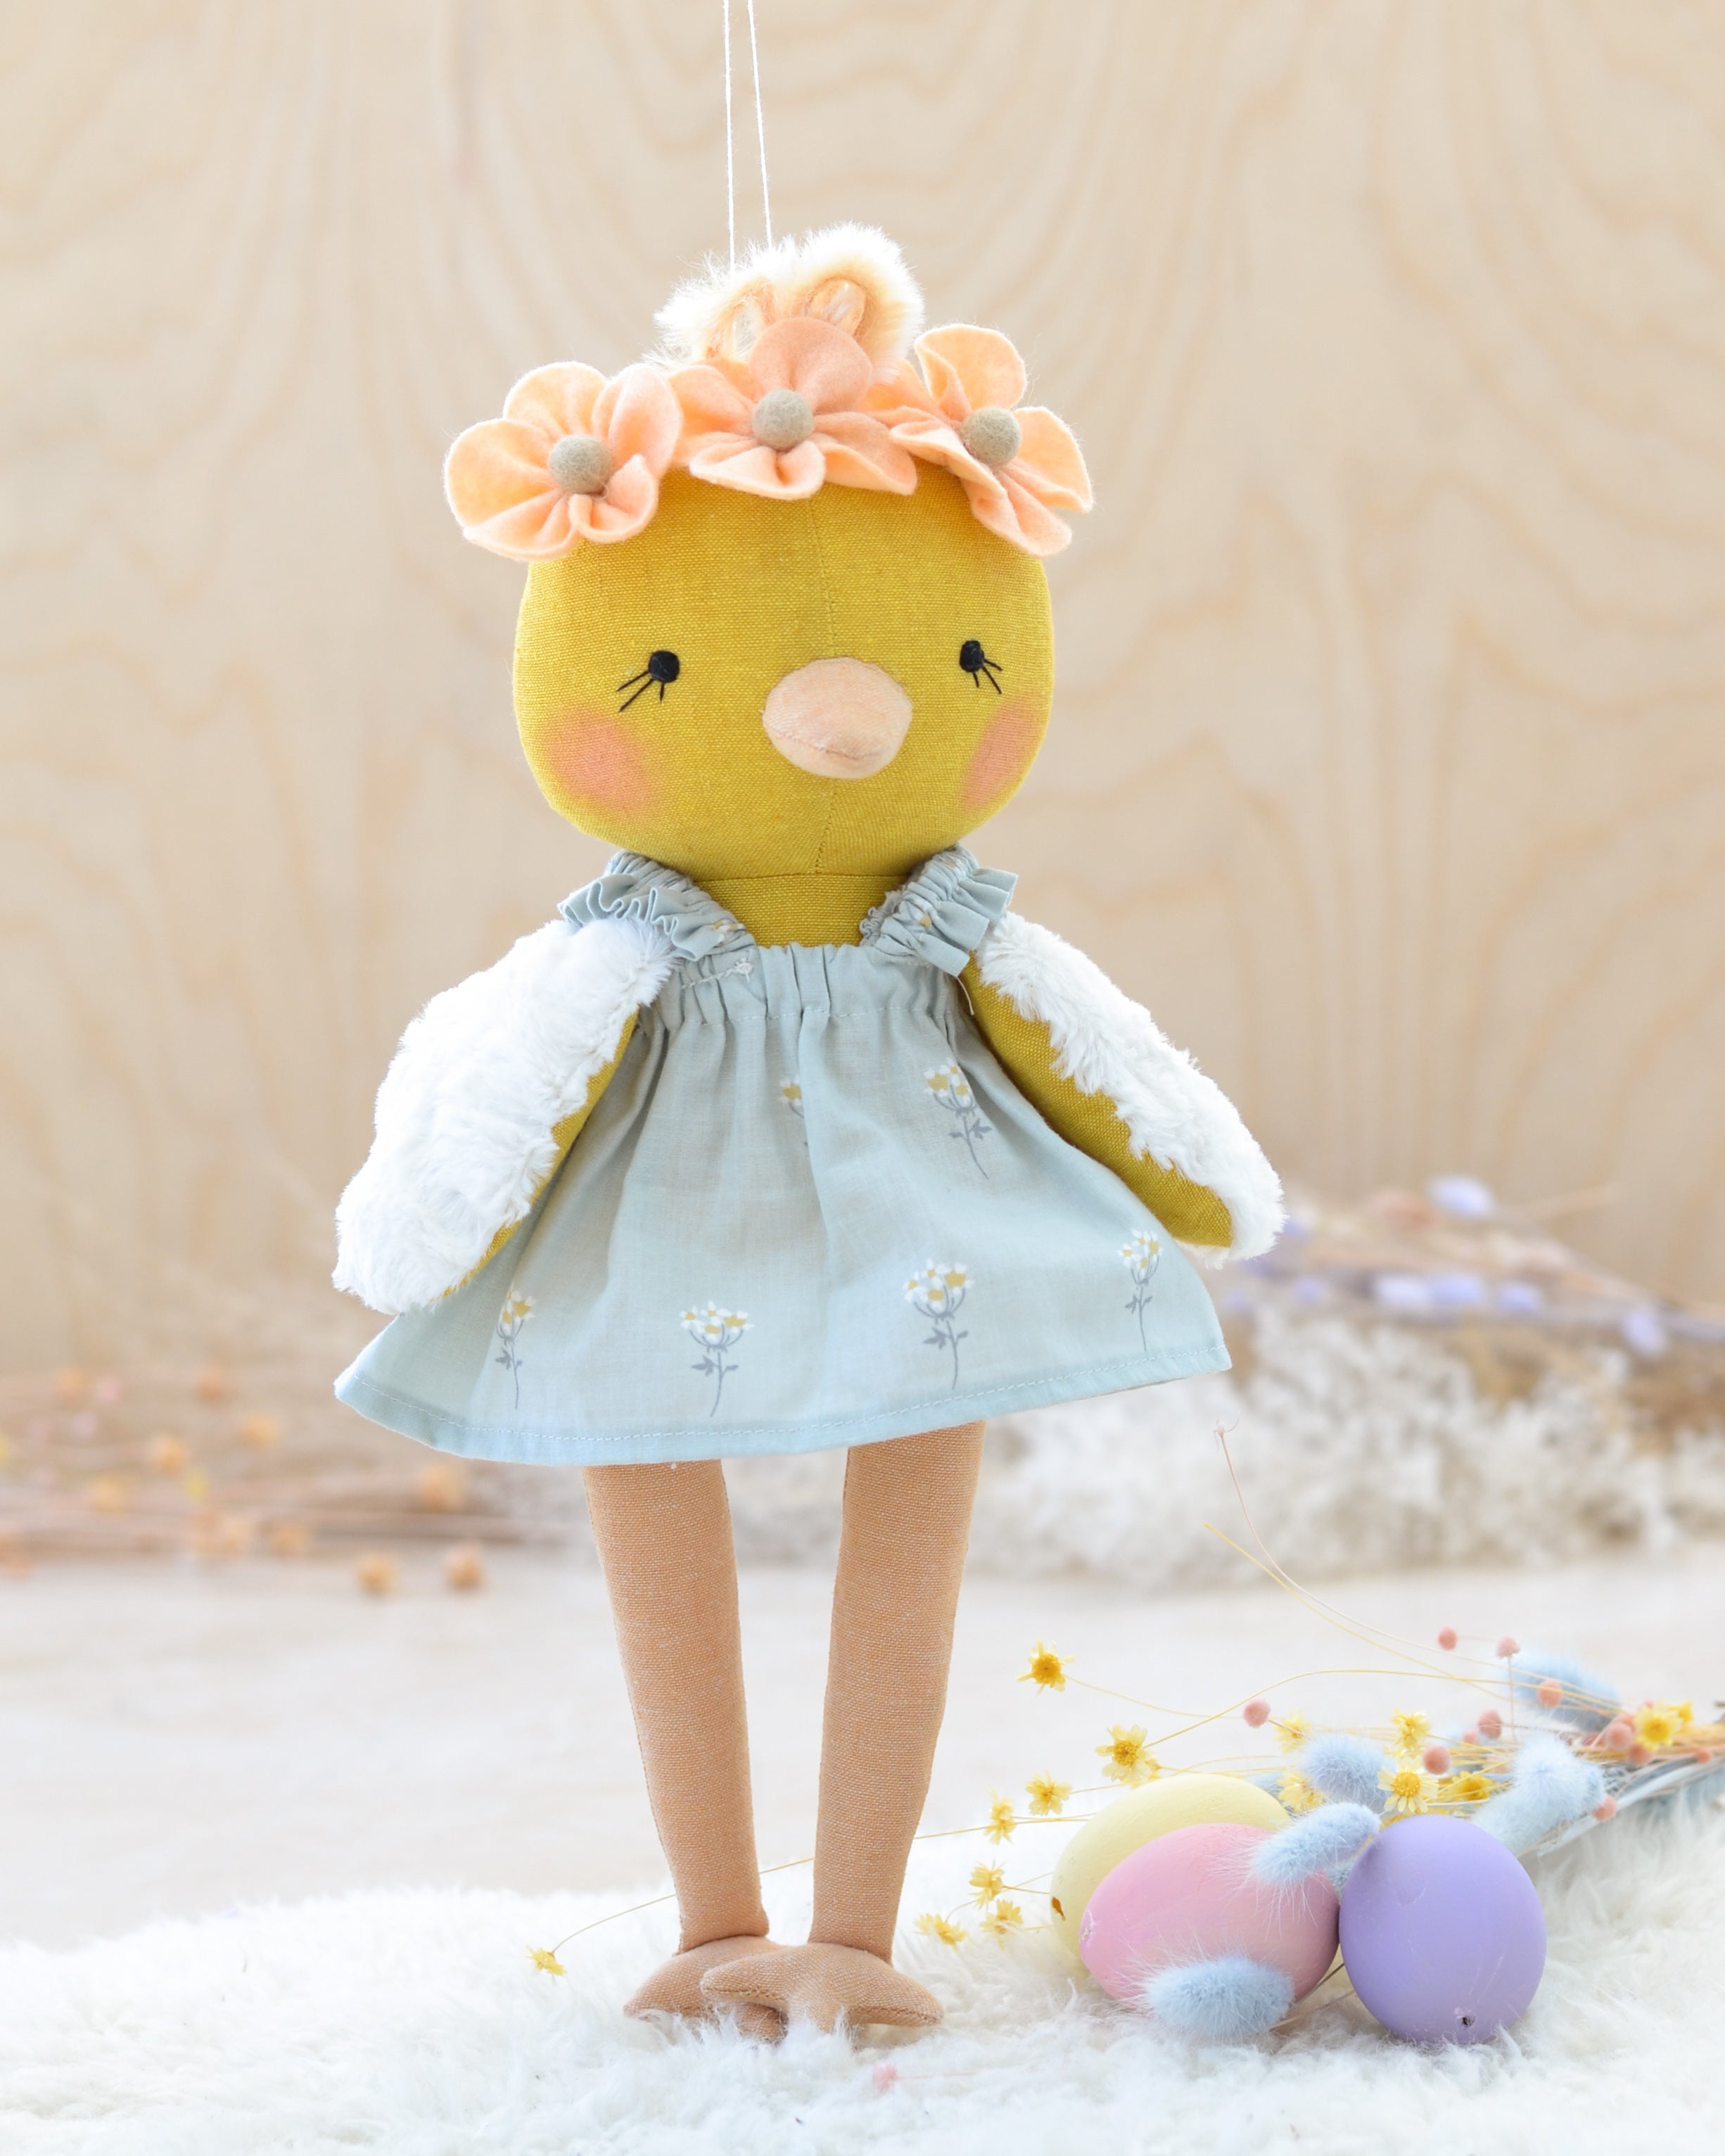 Chick Doll with felt flowers